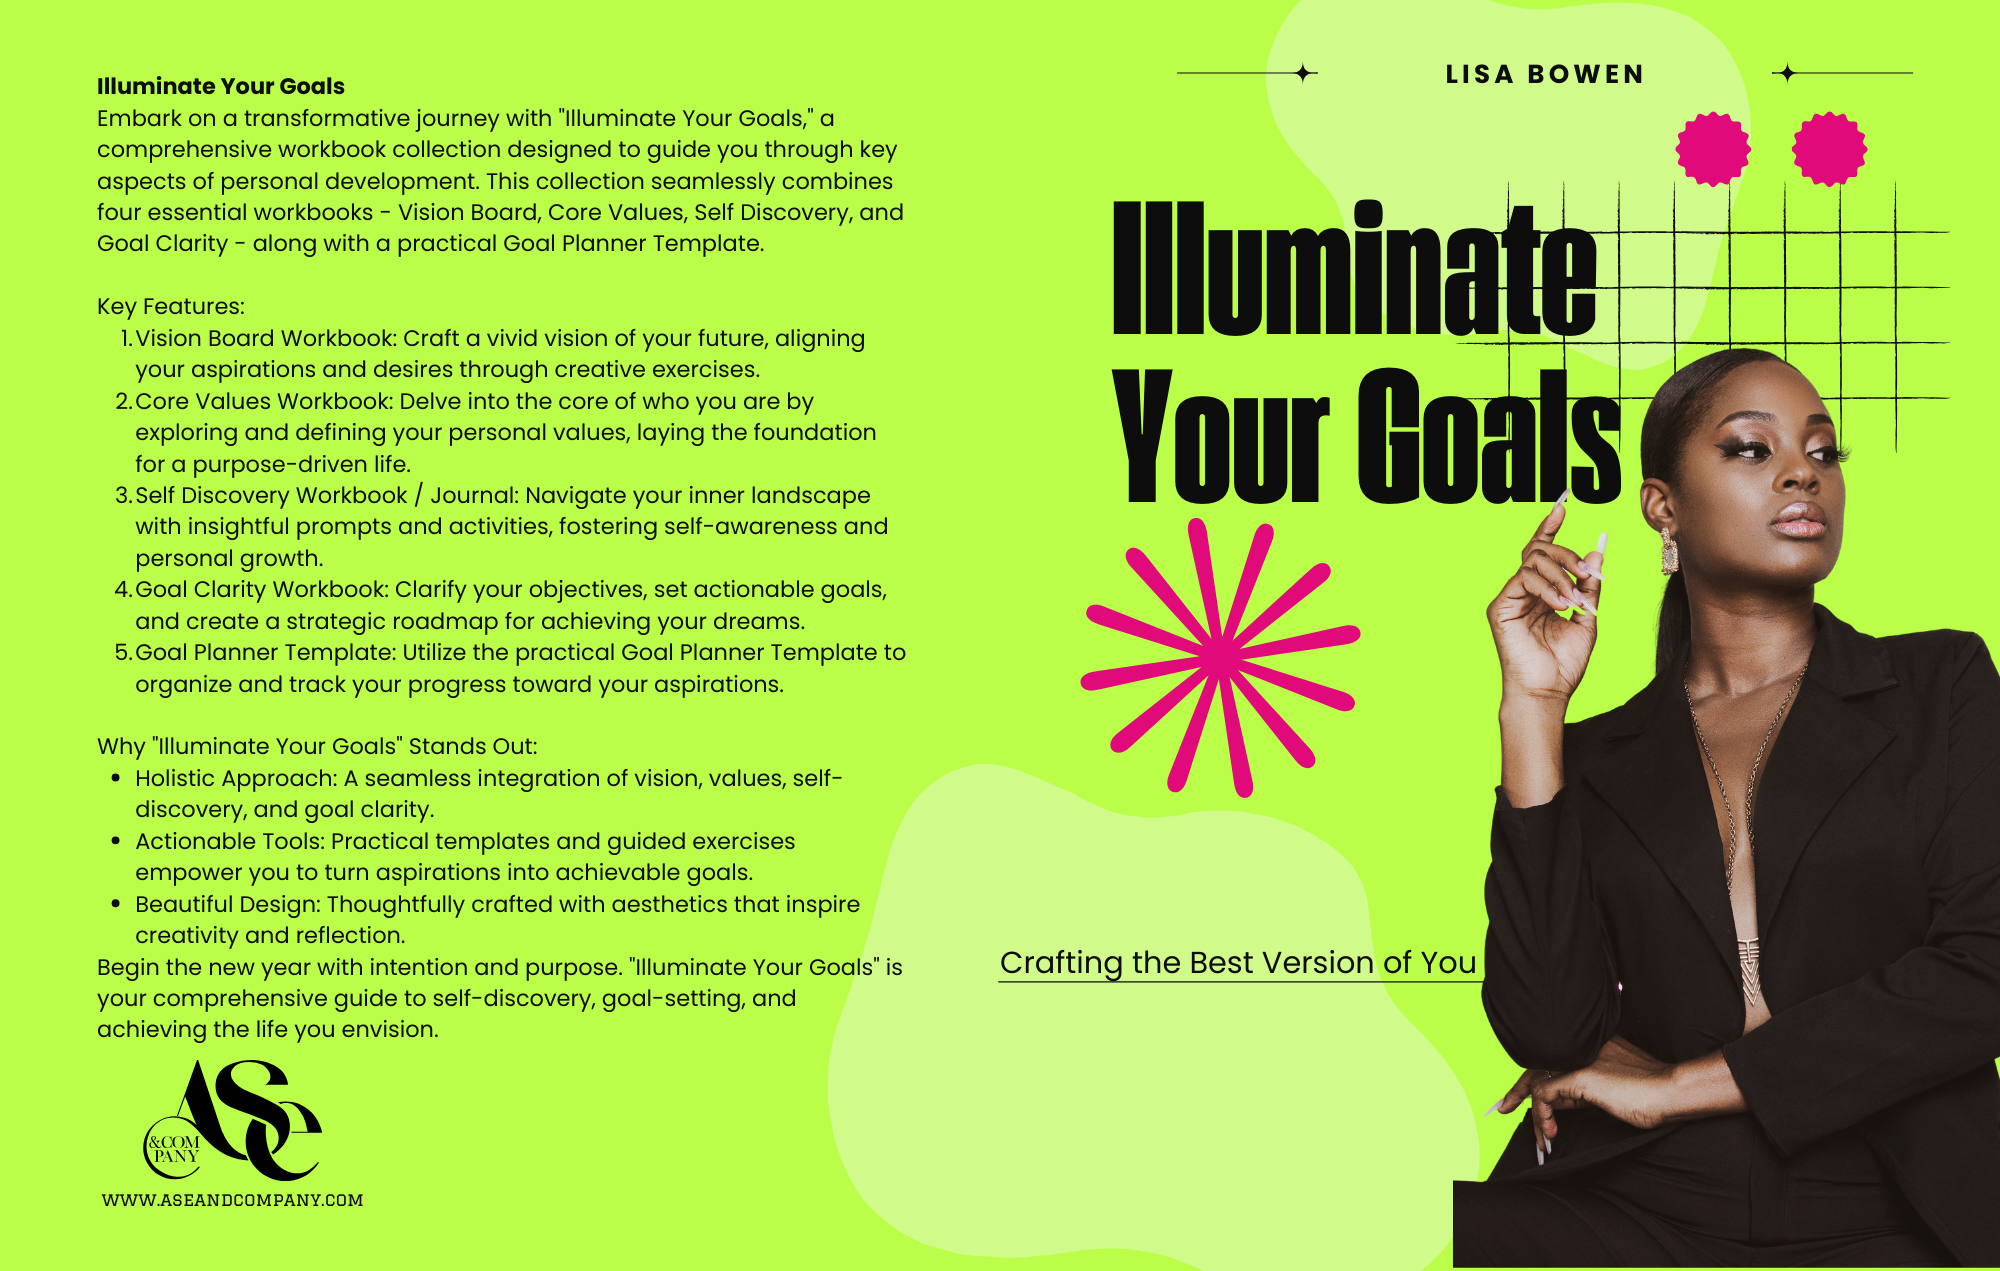 Illuminate Your Goals: Crafting the Best Version of You